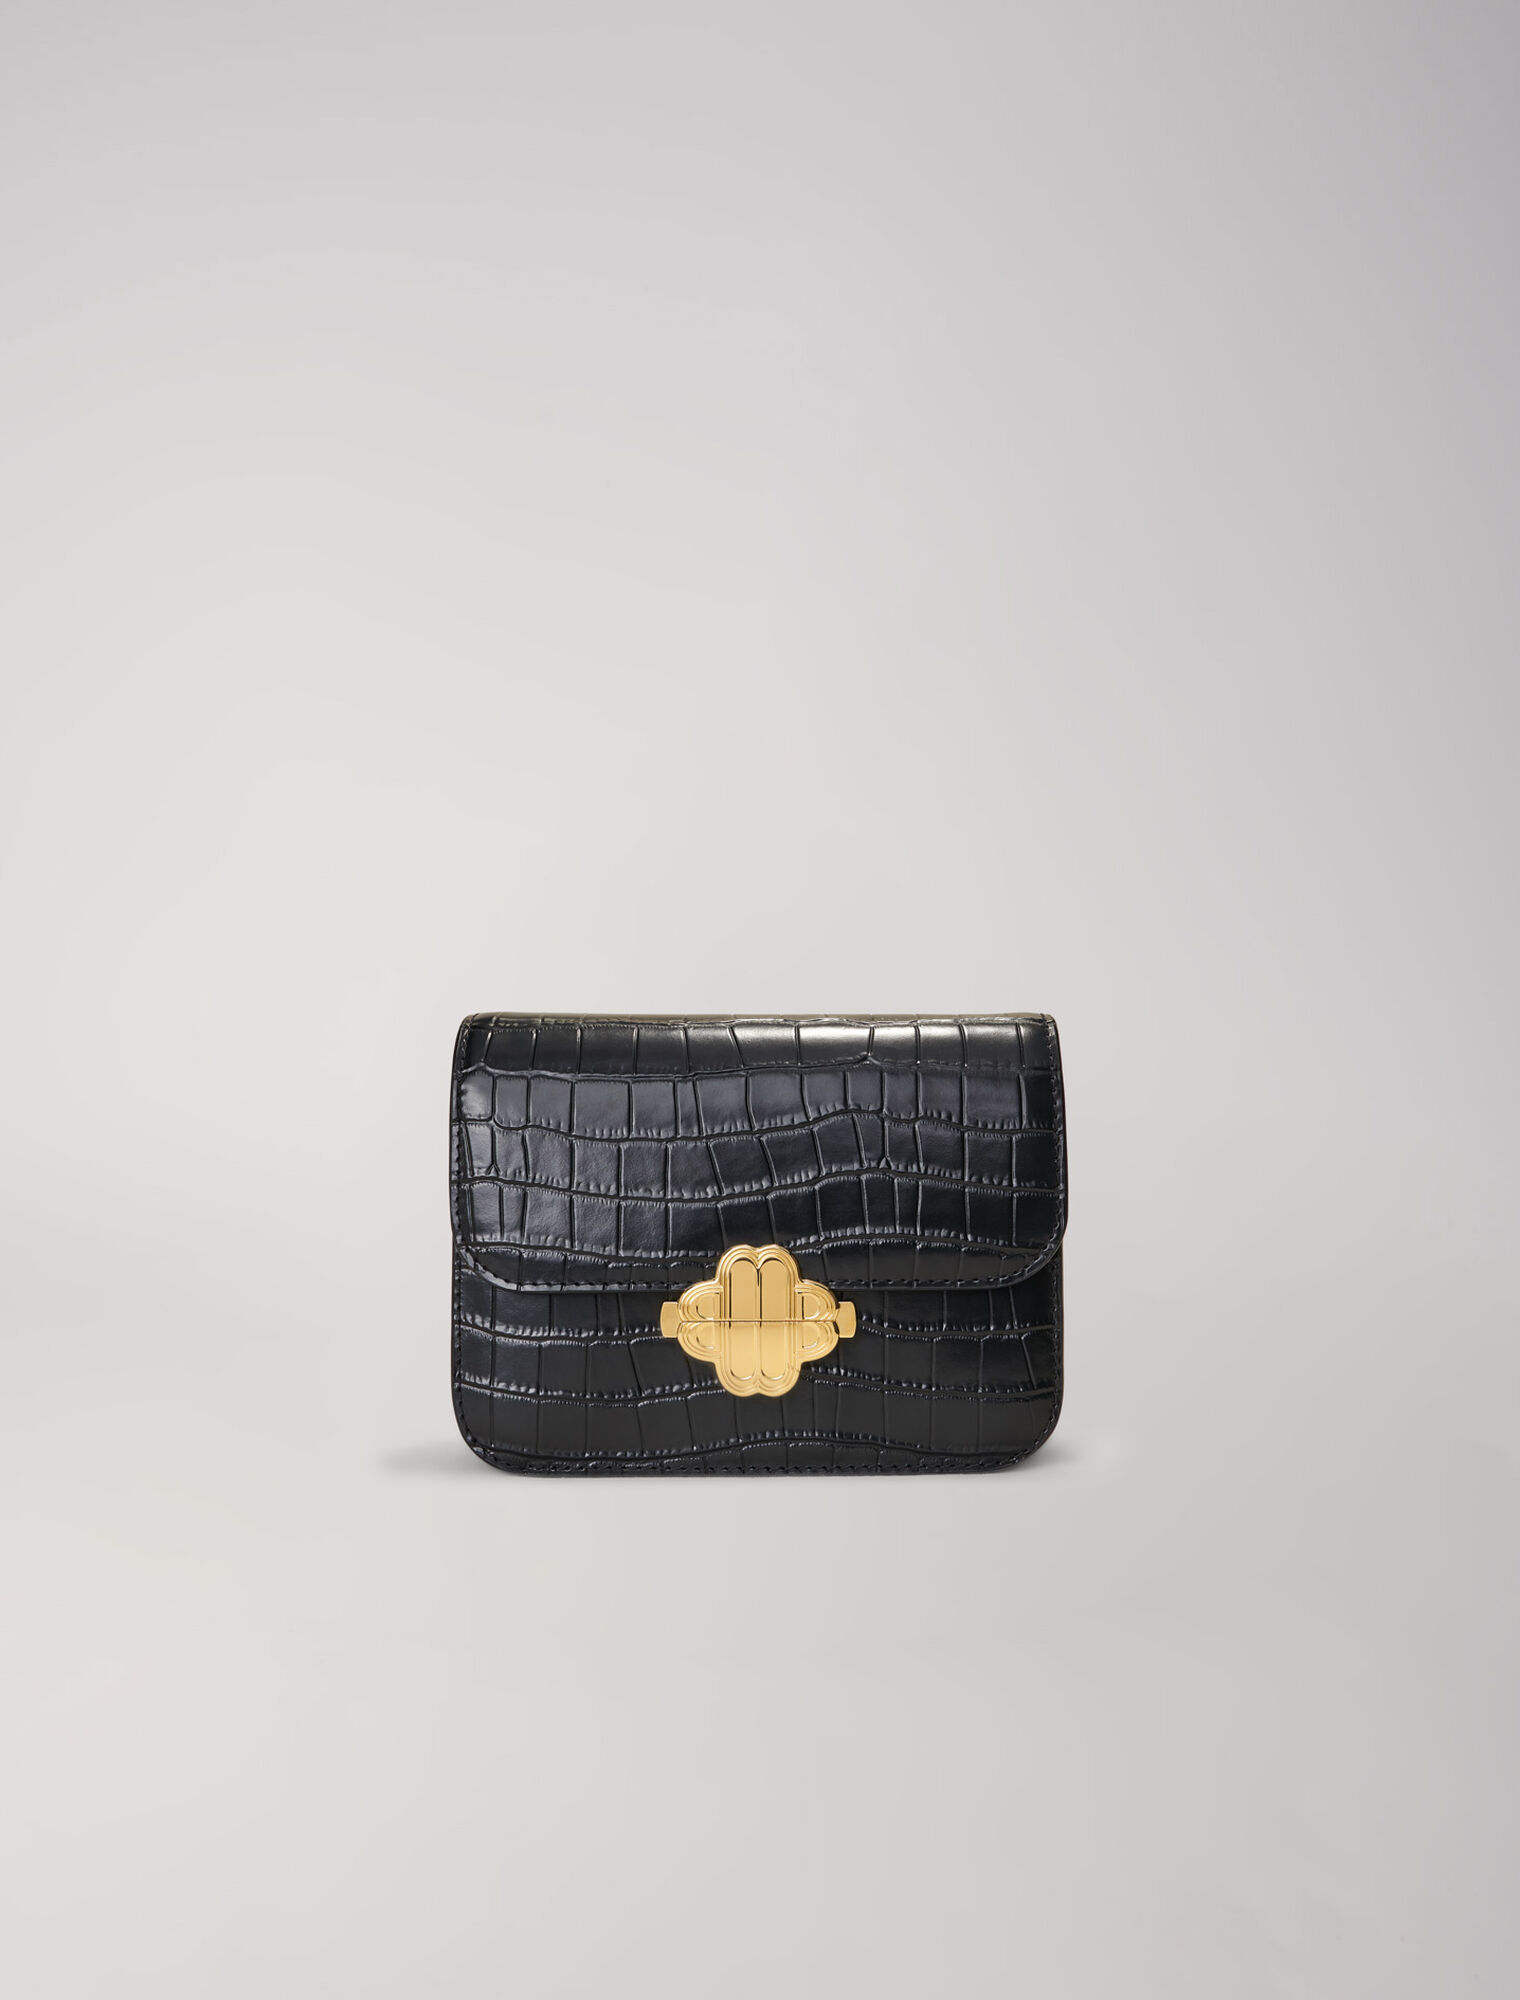 Croco-effect leather Clover bag